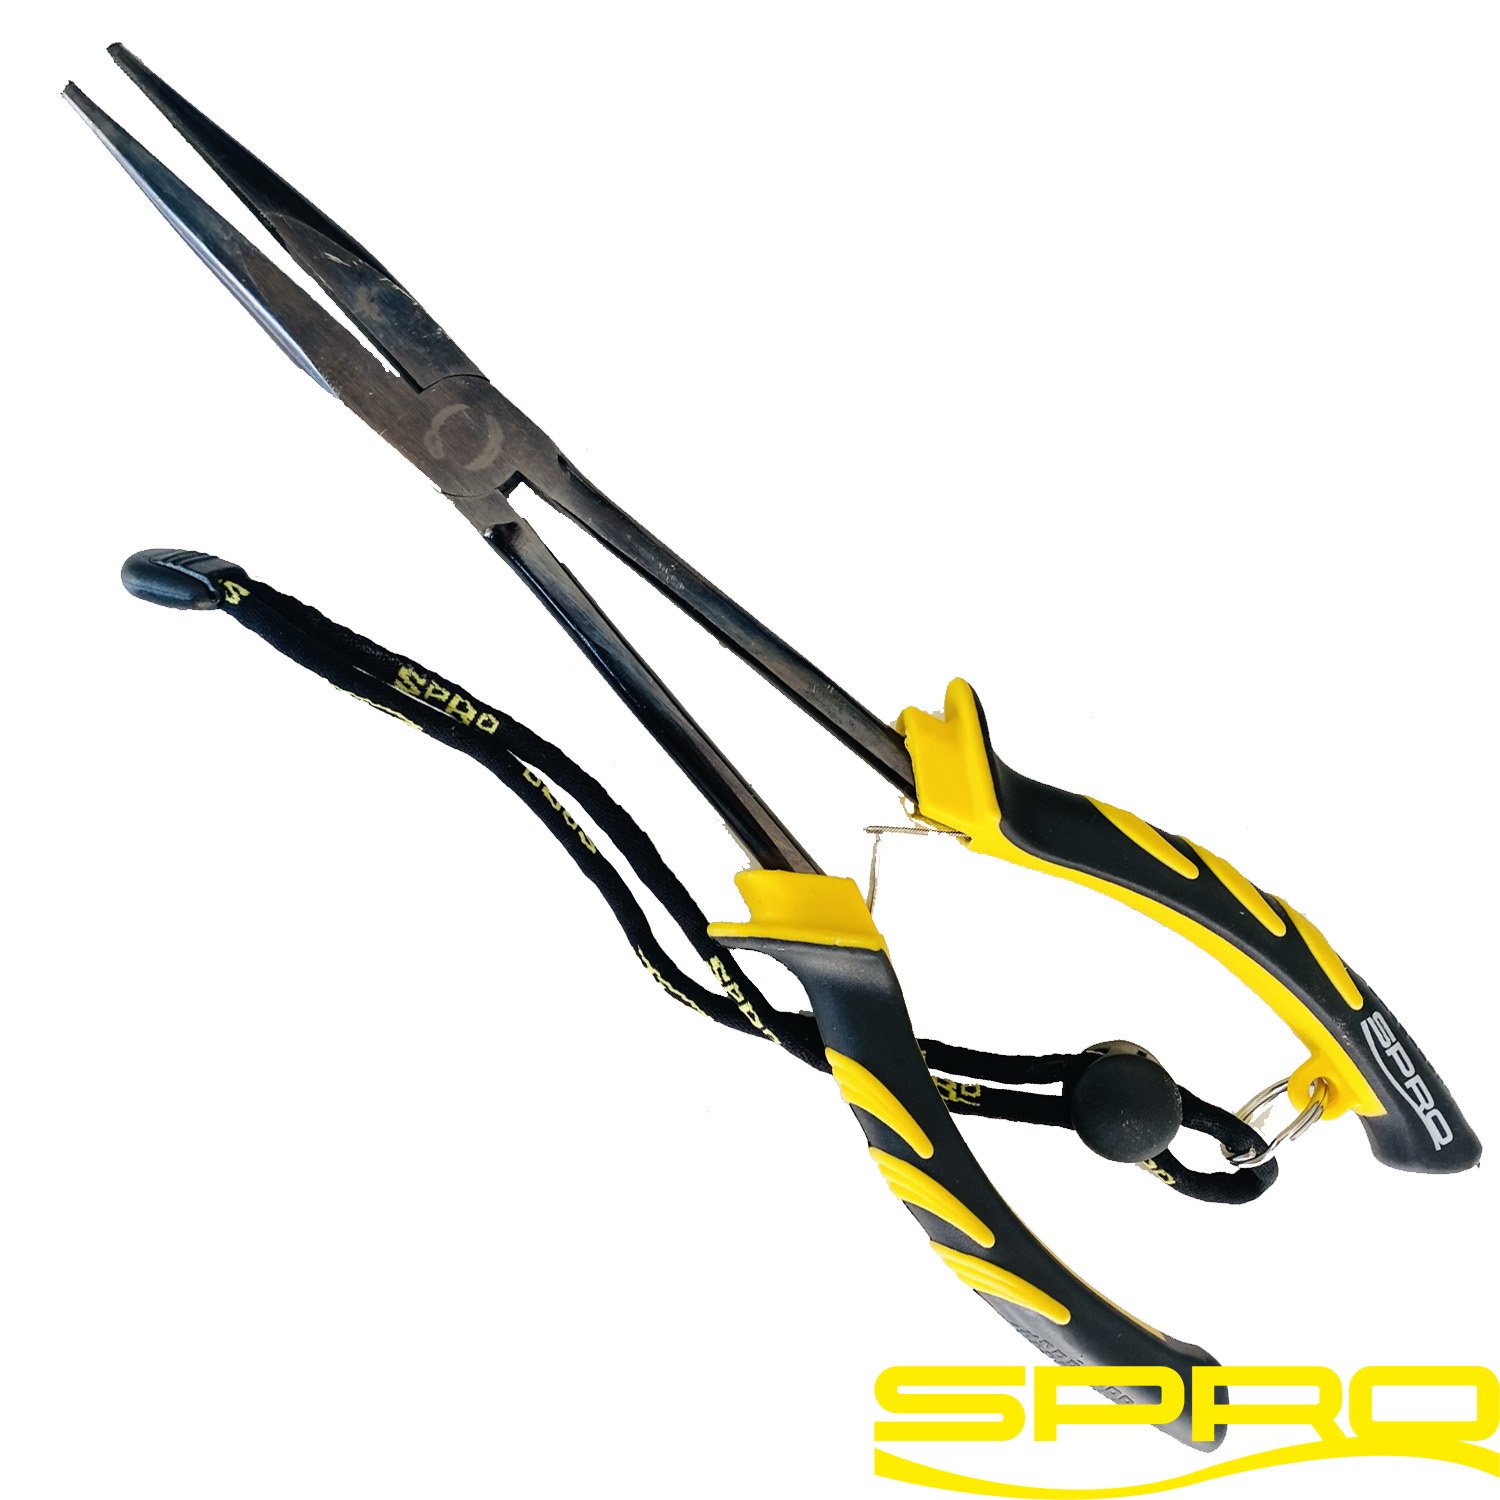 Pince Extra Long Nose Pliers 28cm Spro